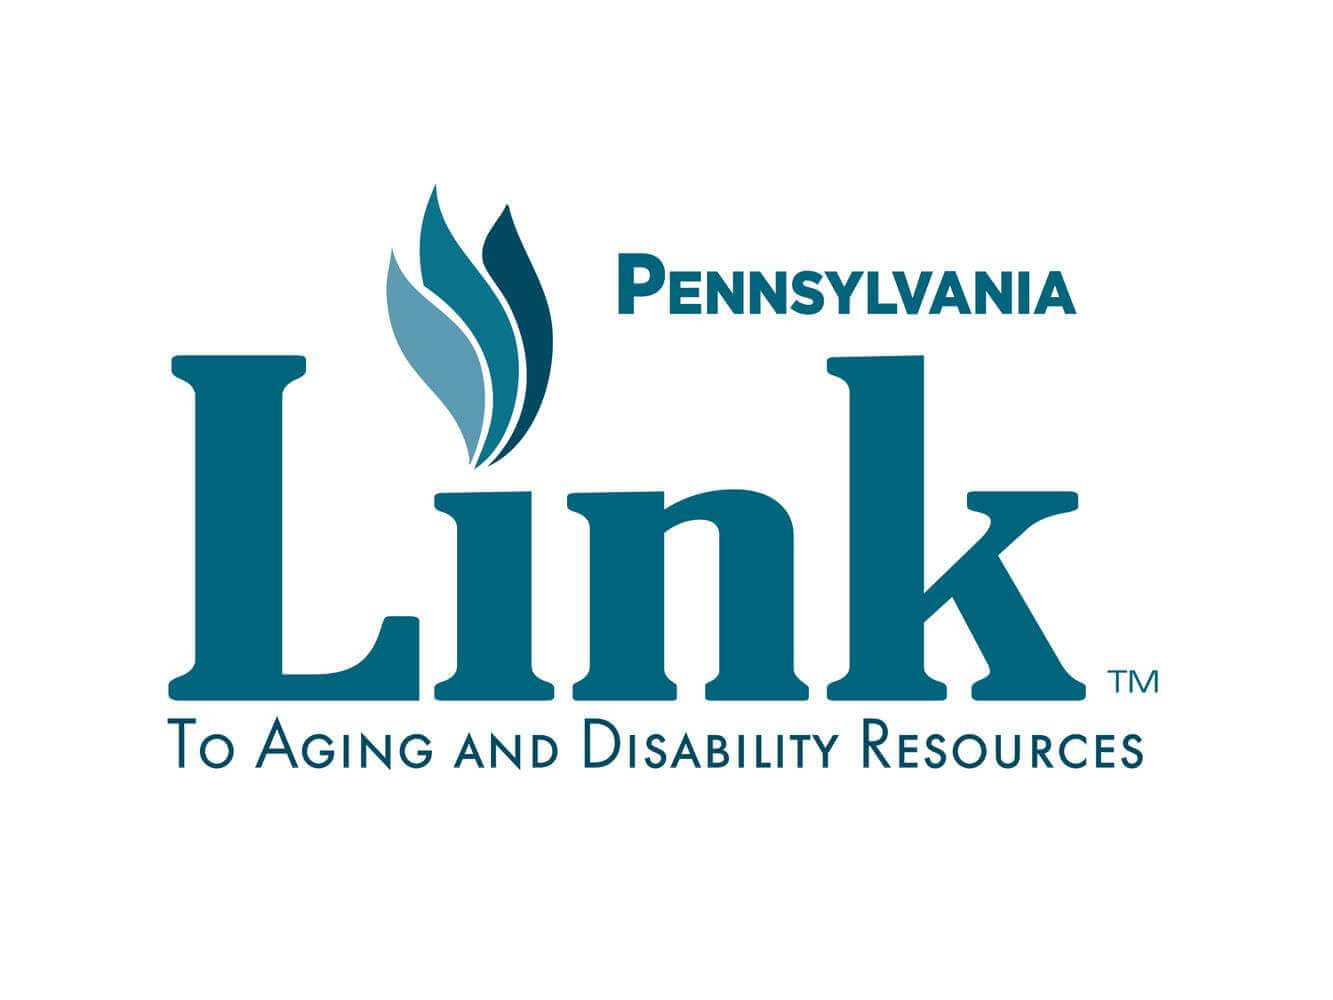 To aging and disability resources